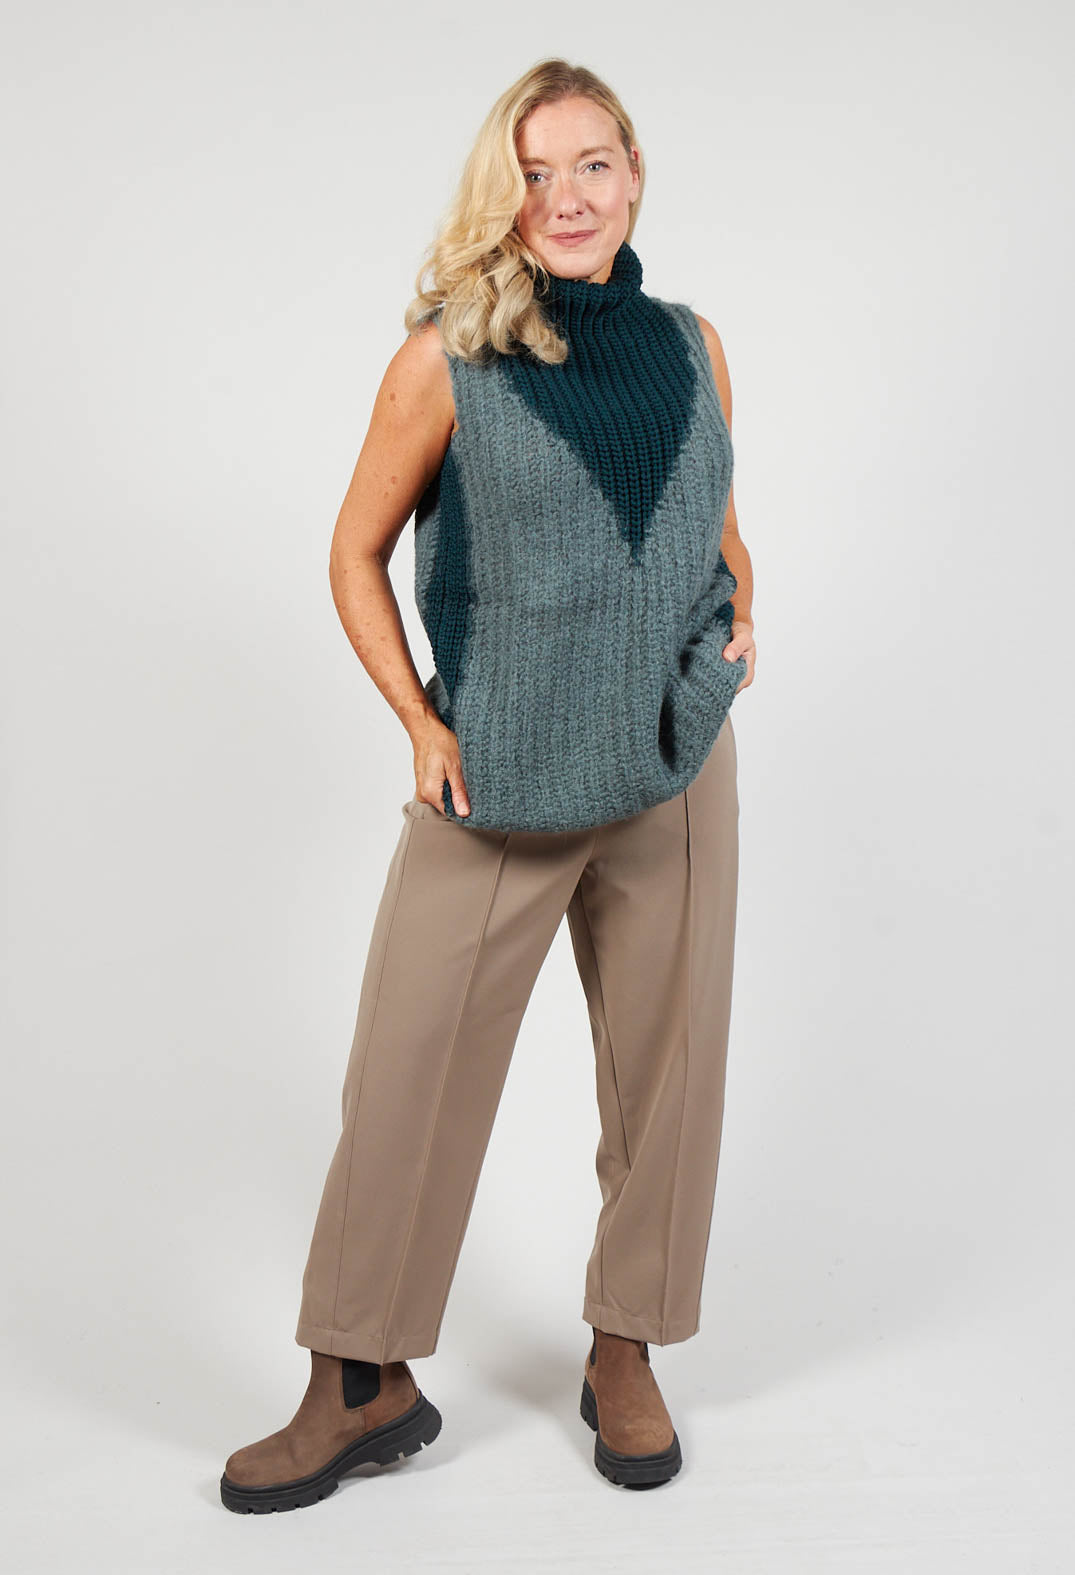 green and grey ladies knit jumper 